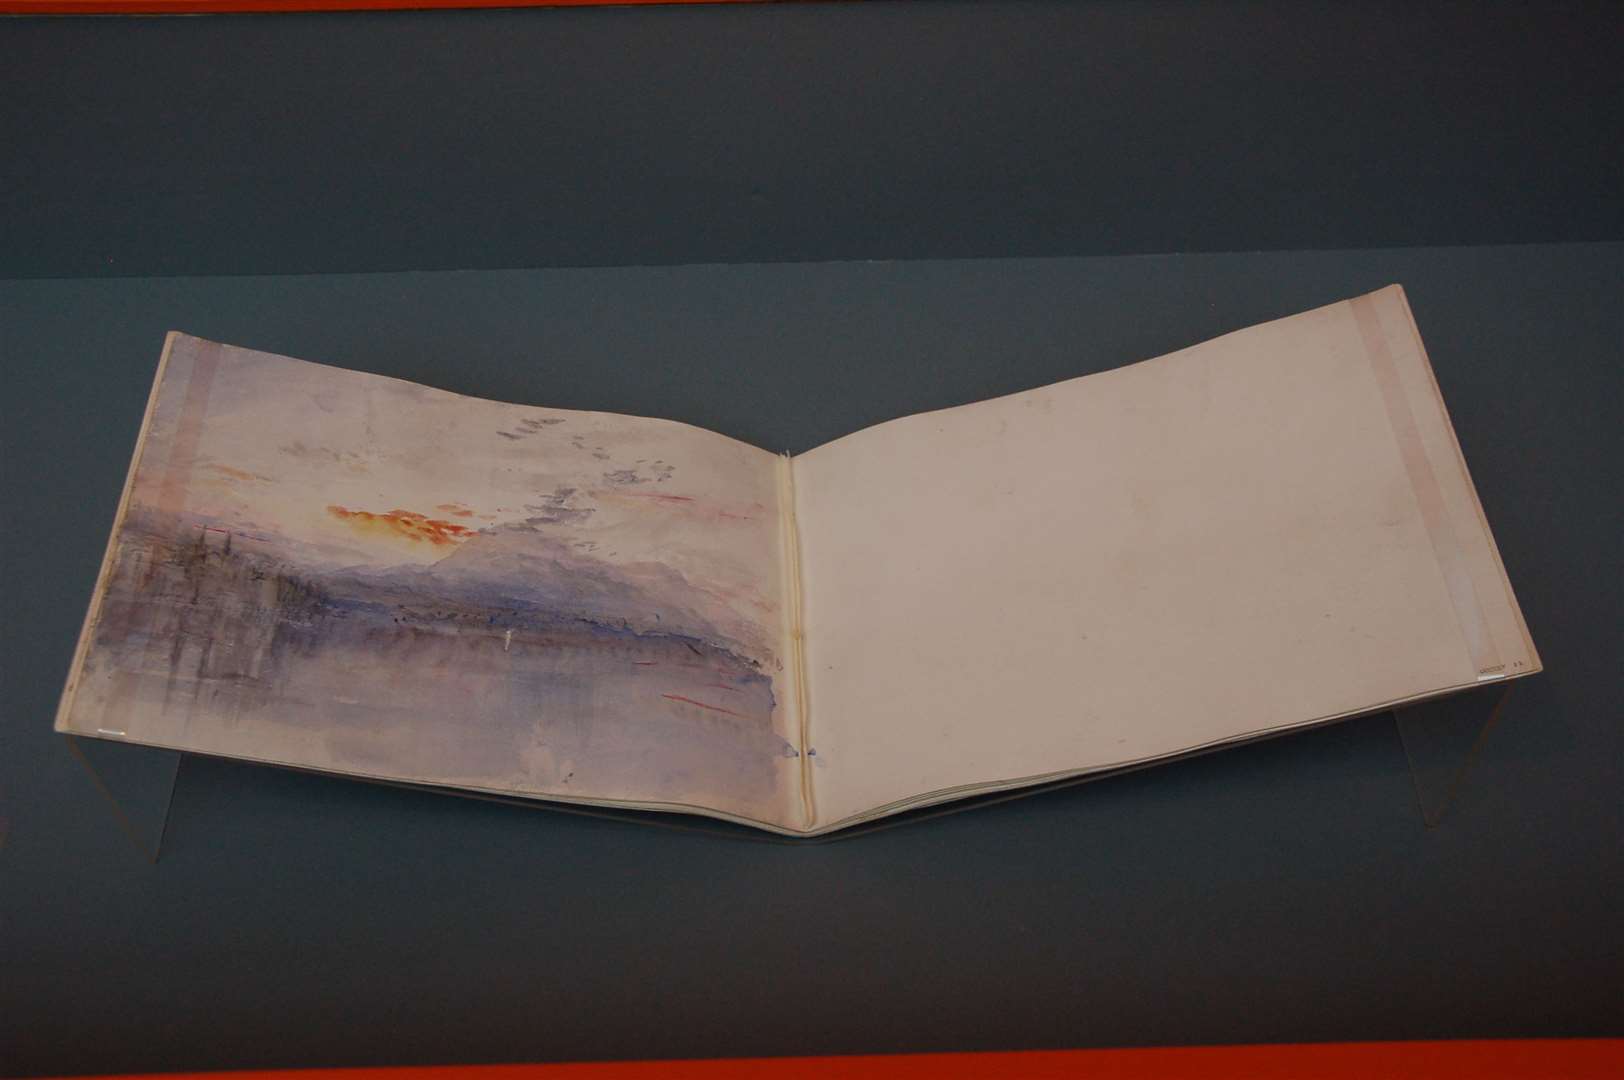 A rare survivor, one of Turner’s sketch books, complete, open display in the KKL, Luzern.